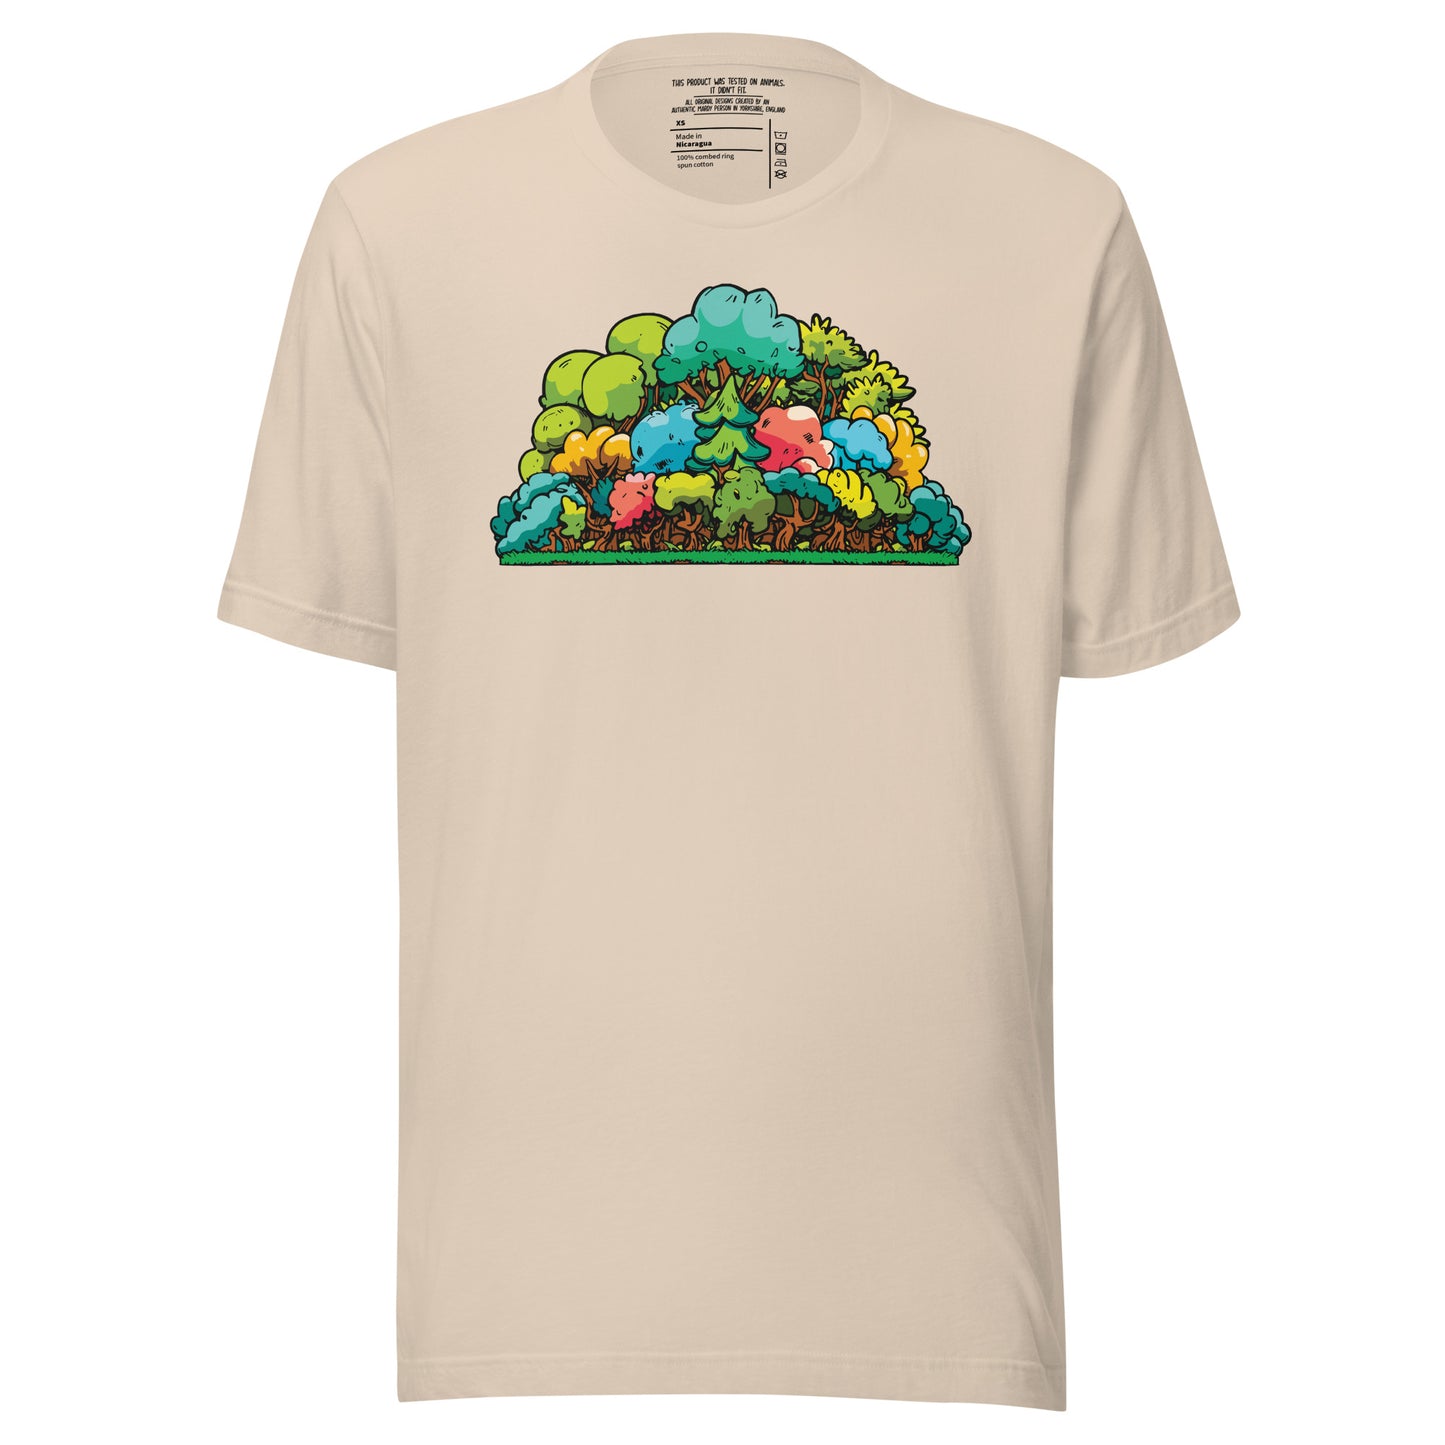 The Woods T-Shirt